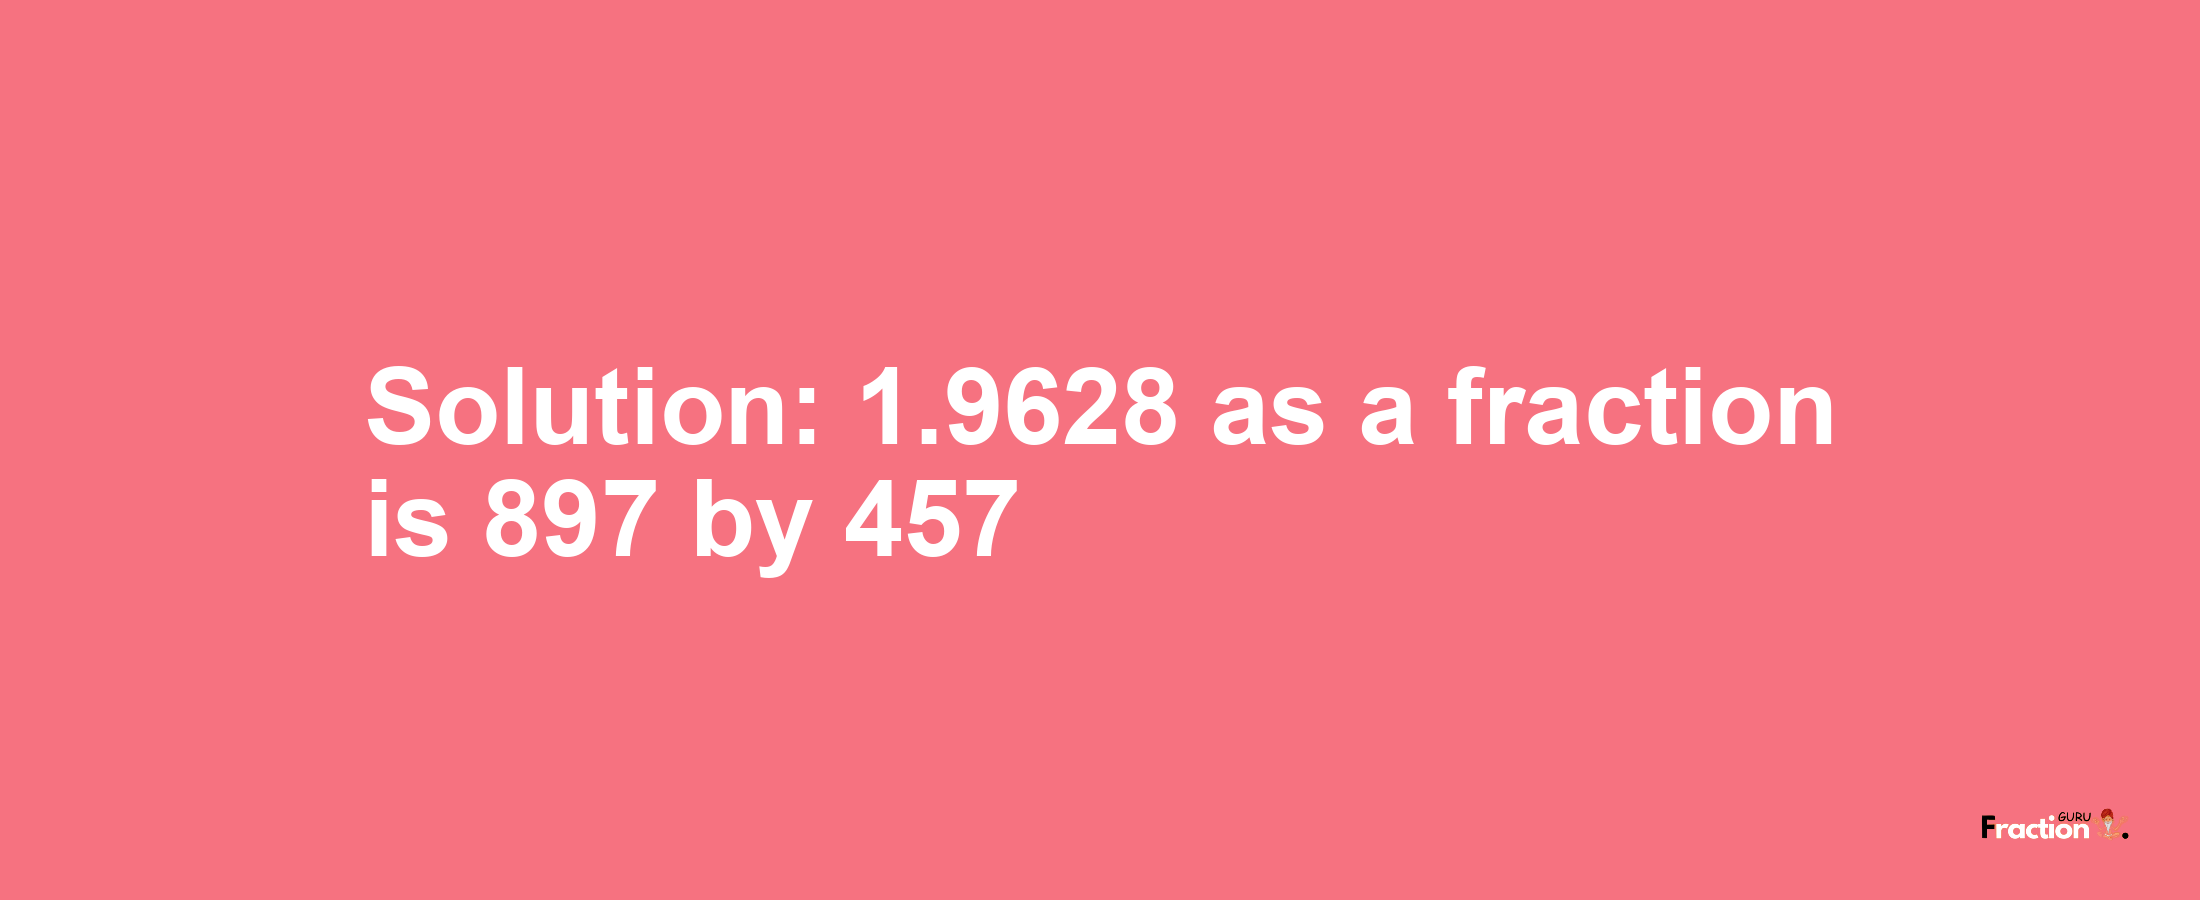 Solution:1.9628 as a fraction is 897/457